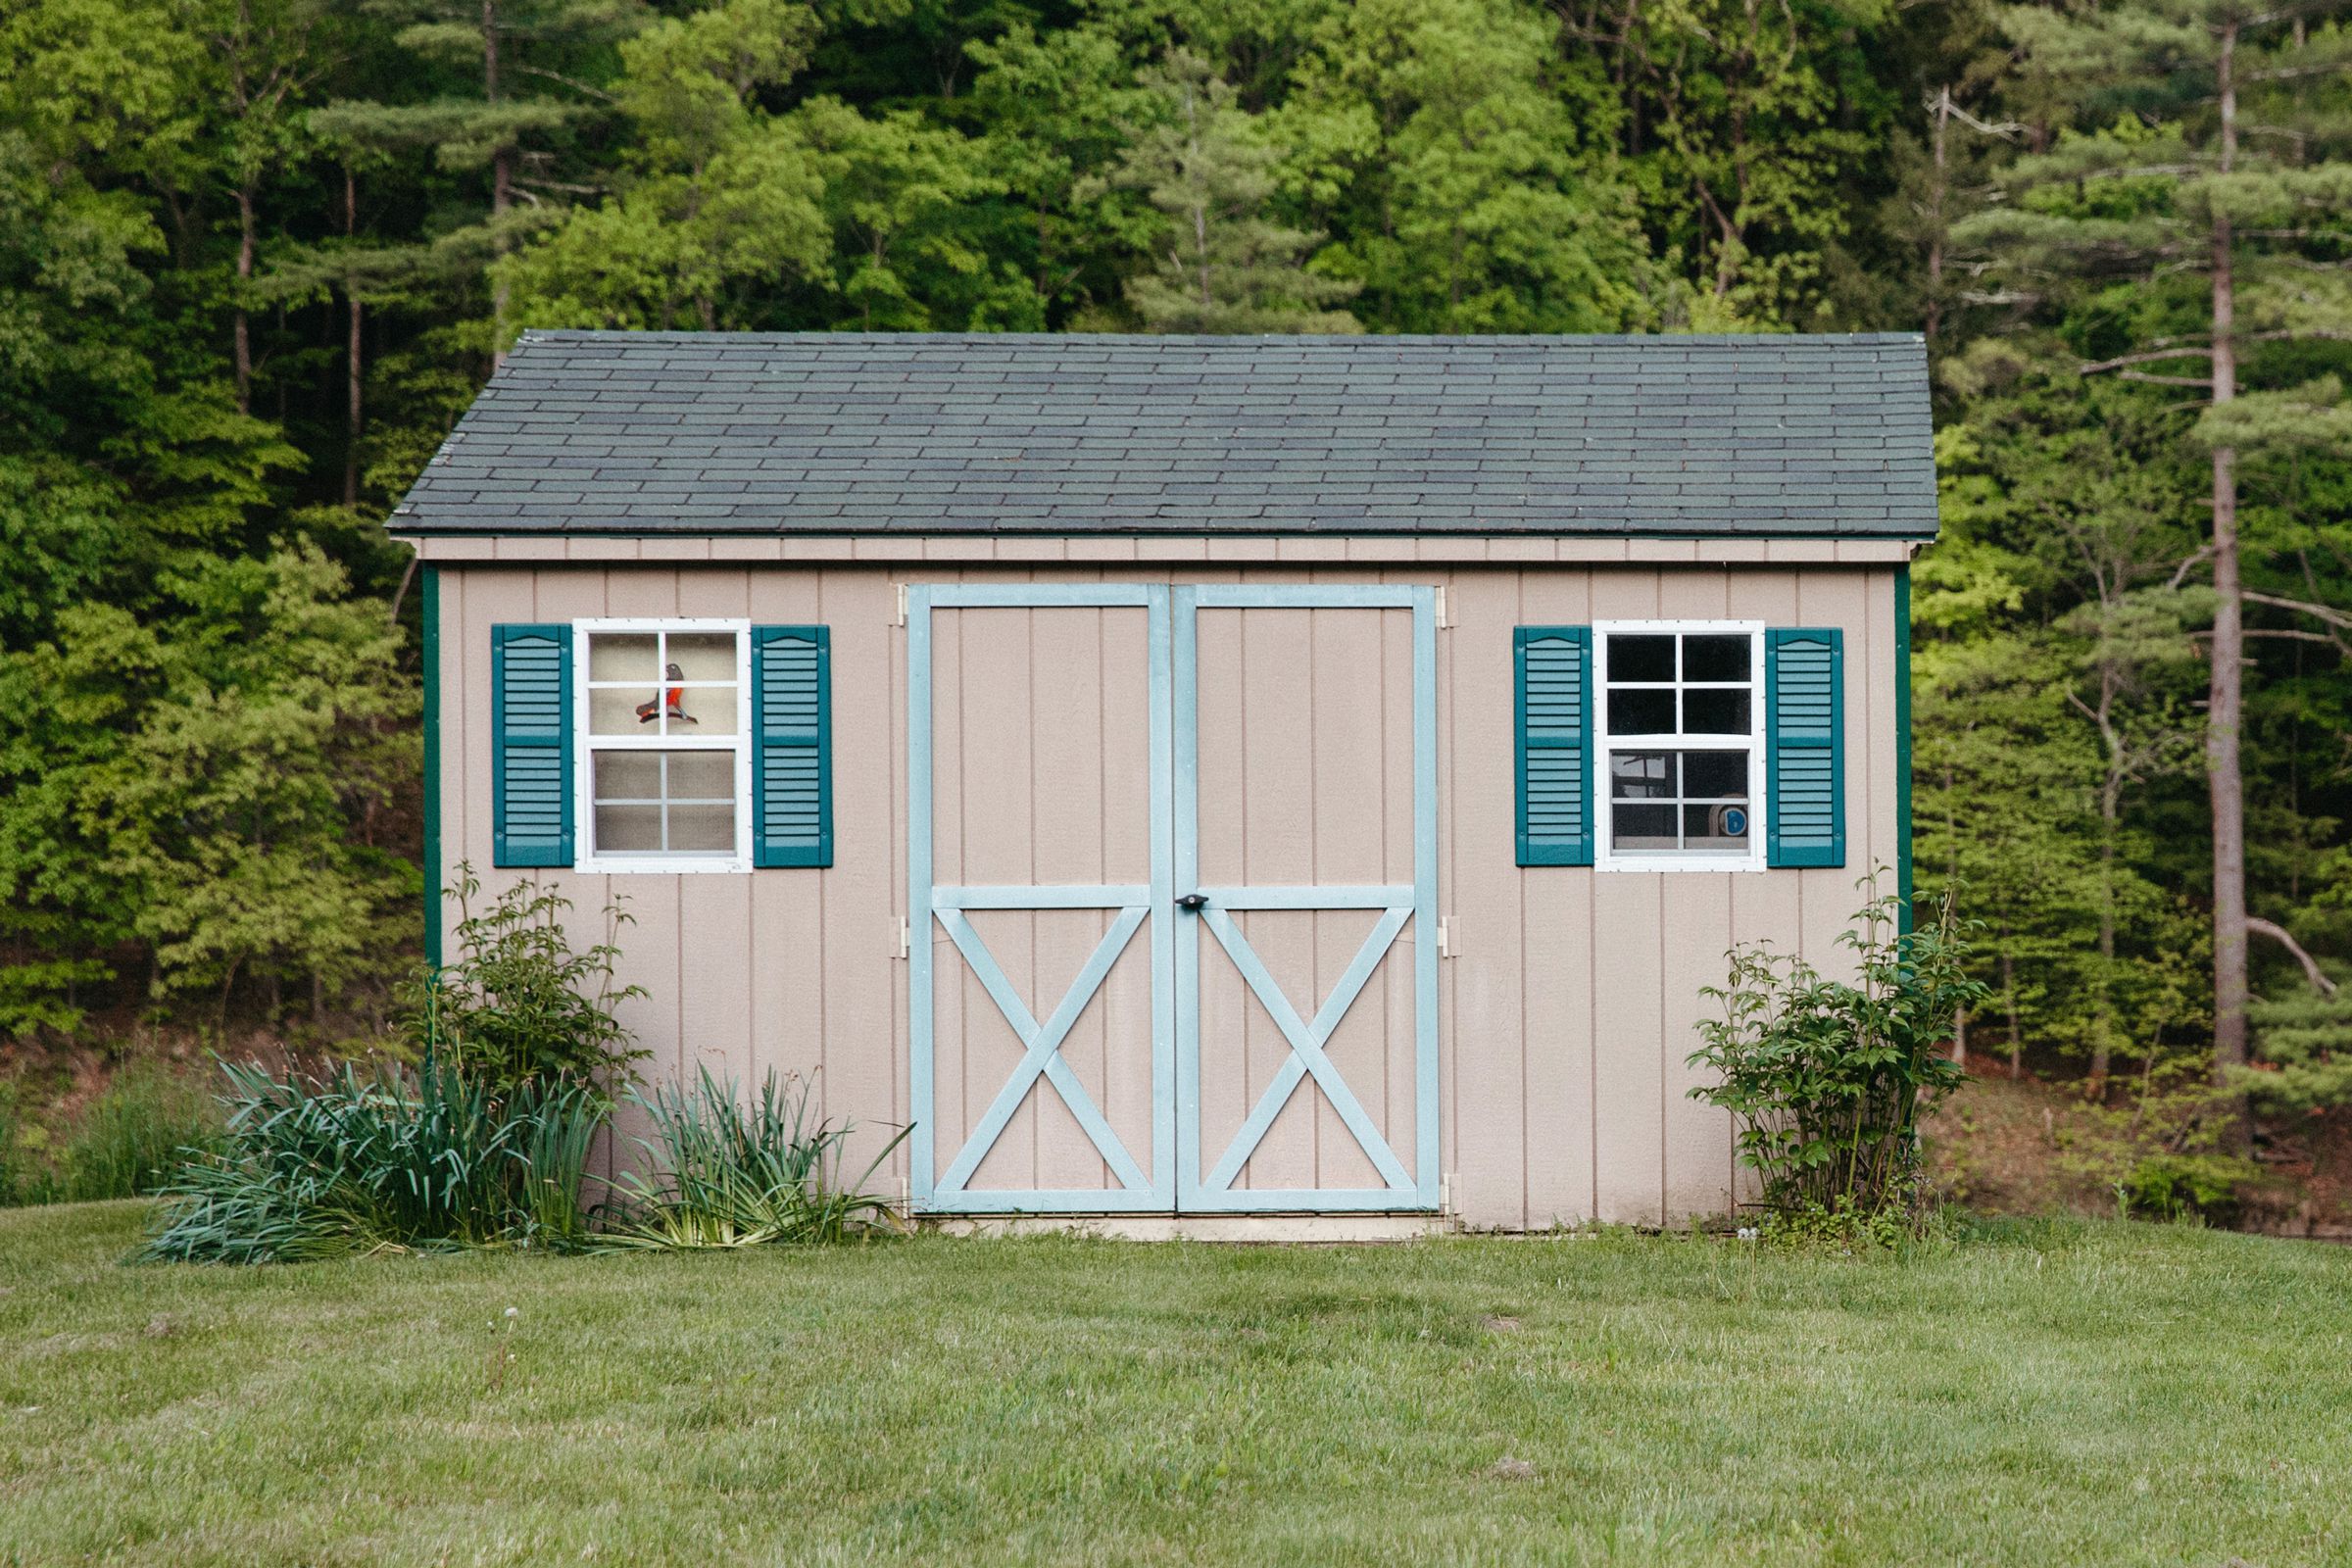 12 Gorgeous Garden Shed Ideas You ll Want to Copy